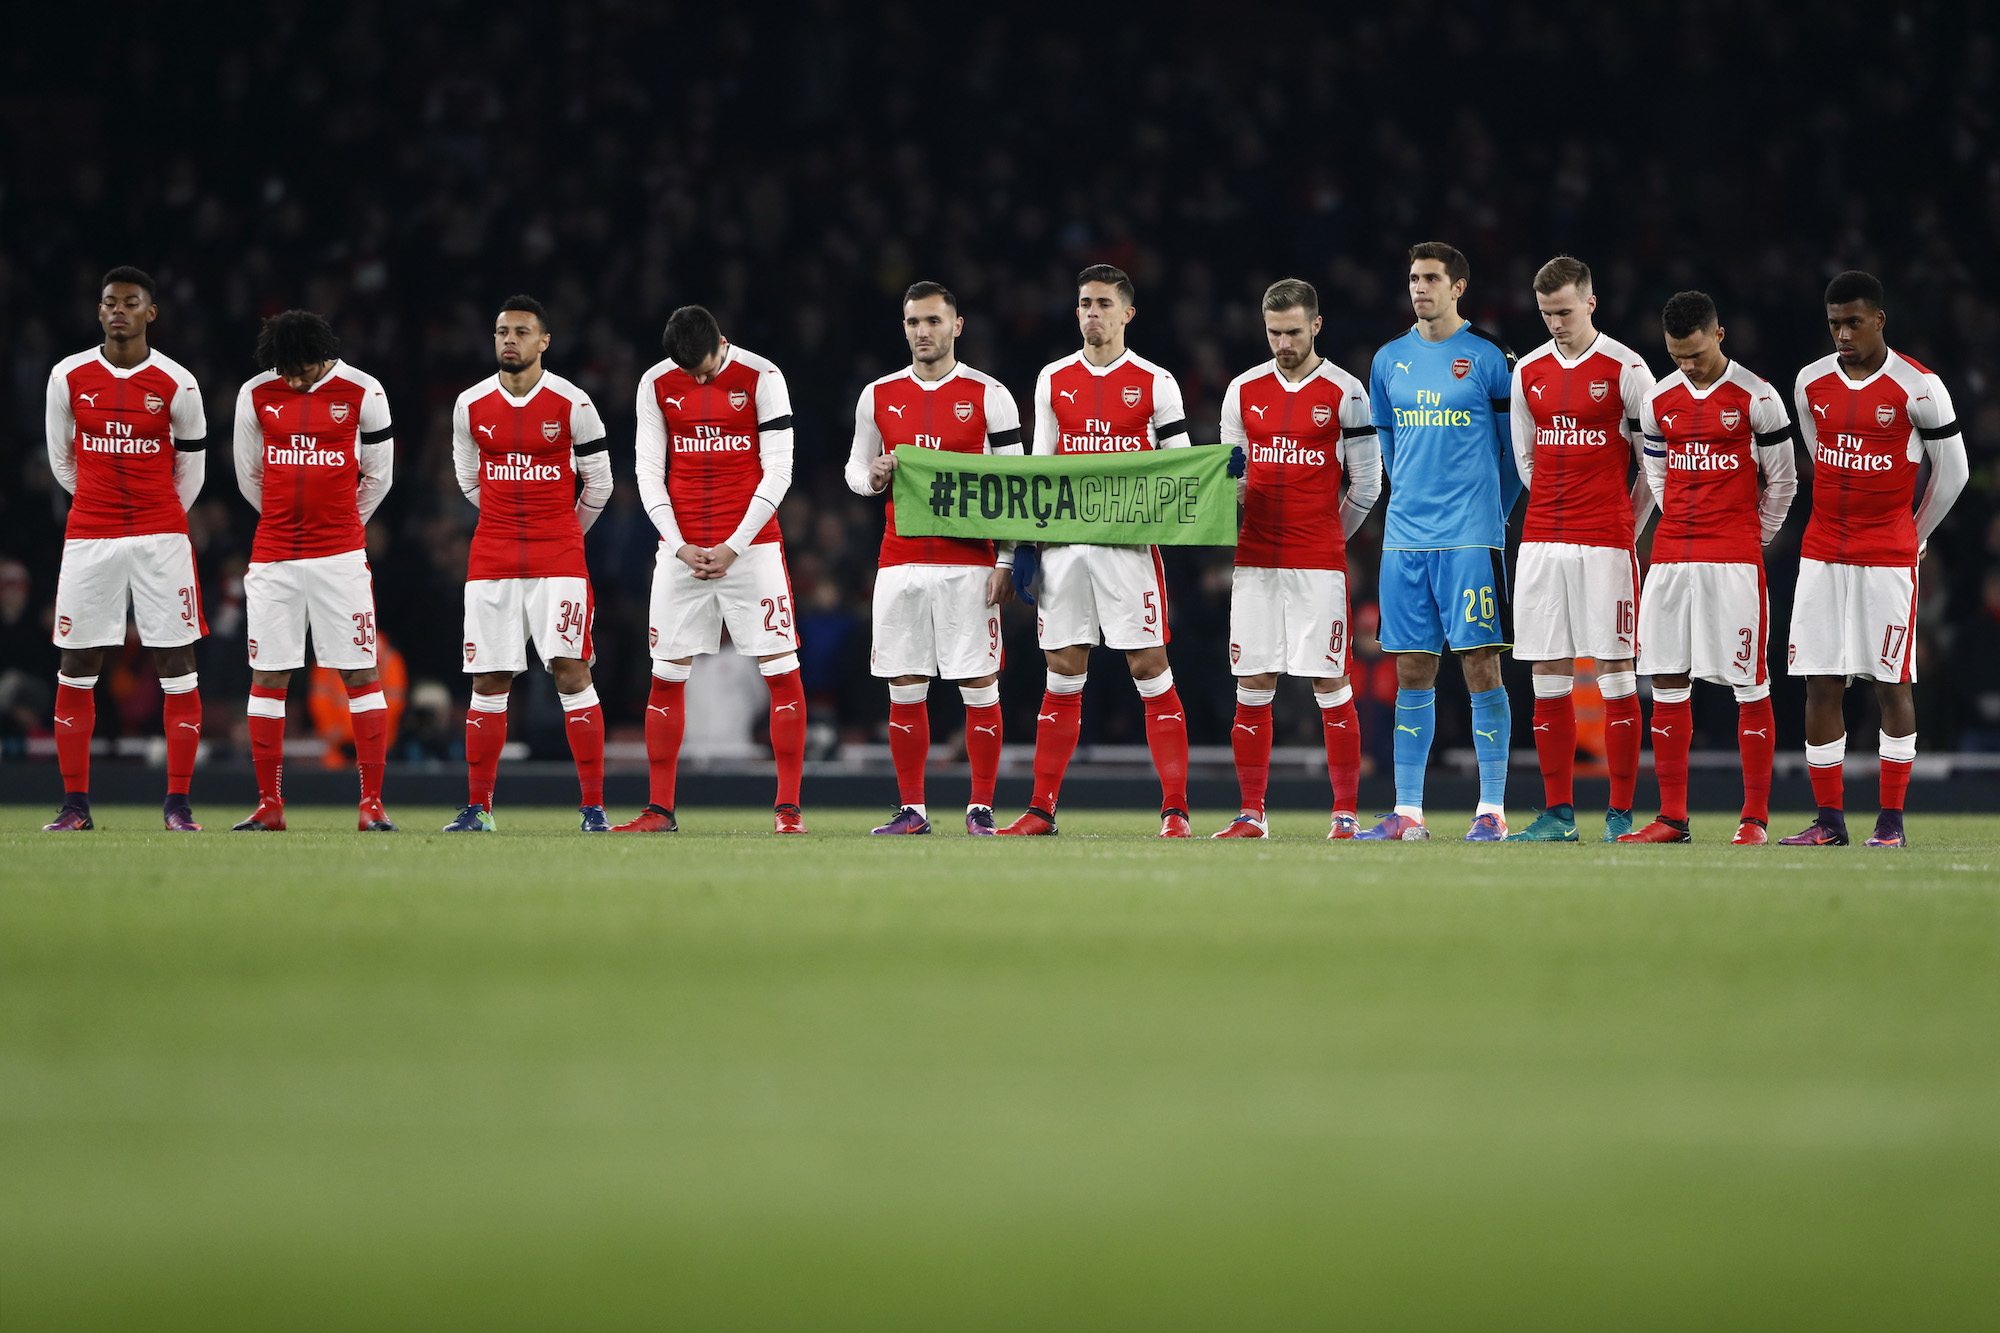 Britain Football Soccer - Arsenal v Southampton - EFL Cup Quarter Final - Emirates Stadium - 30/11/16 Arsenal players observe a minutes silence as respect for the victims of the Colombia plane crash containing the Chapecoense players and staff Reuters / Stefan Wermuth Livepic EDITORIAL USE ONLY. No use with unauthorized audio, video, data, fixture lists, club/league logos or 